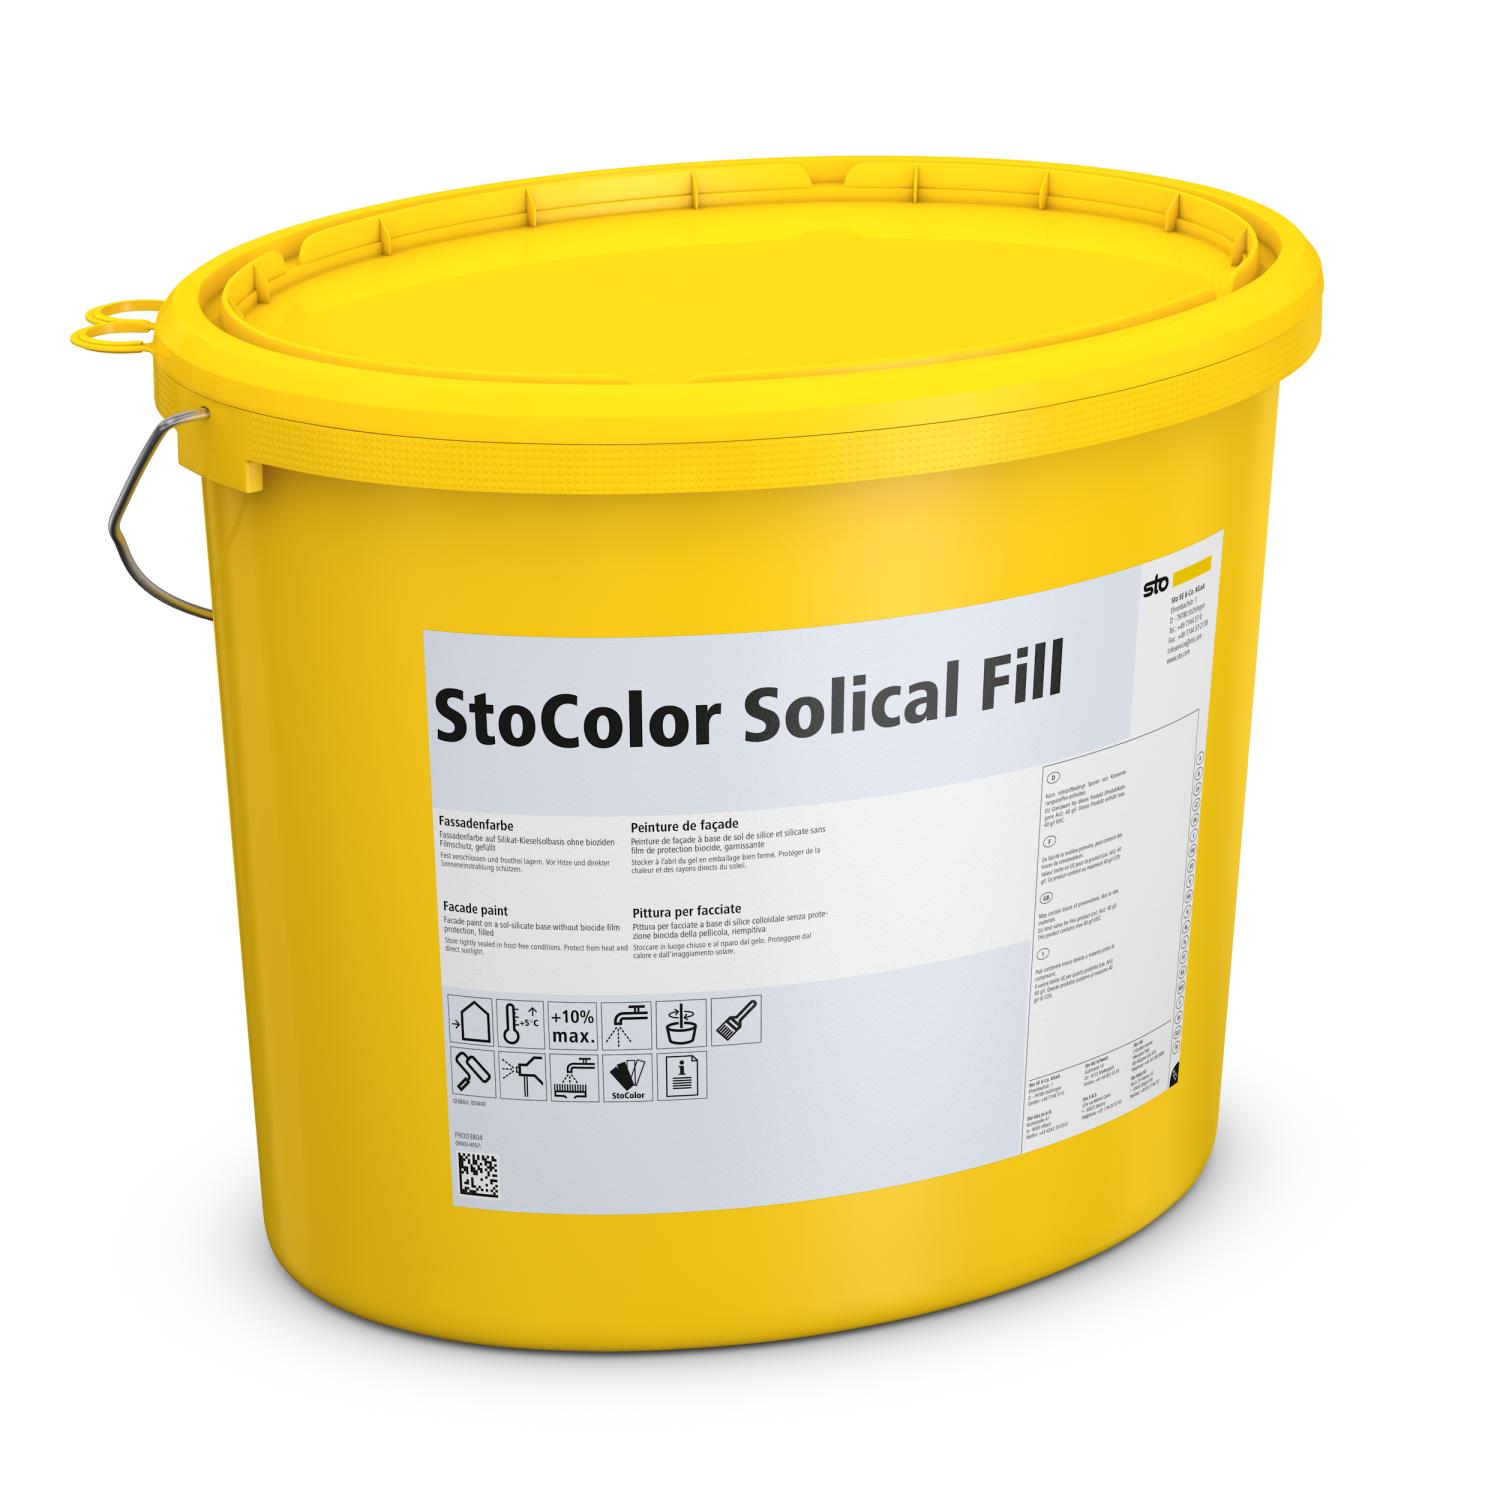 StoColor Solical Fill